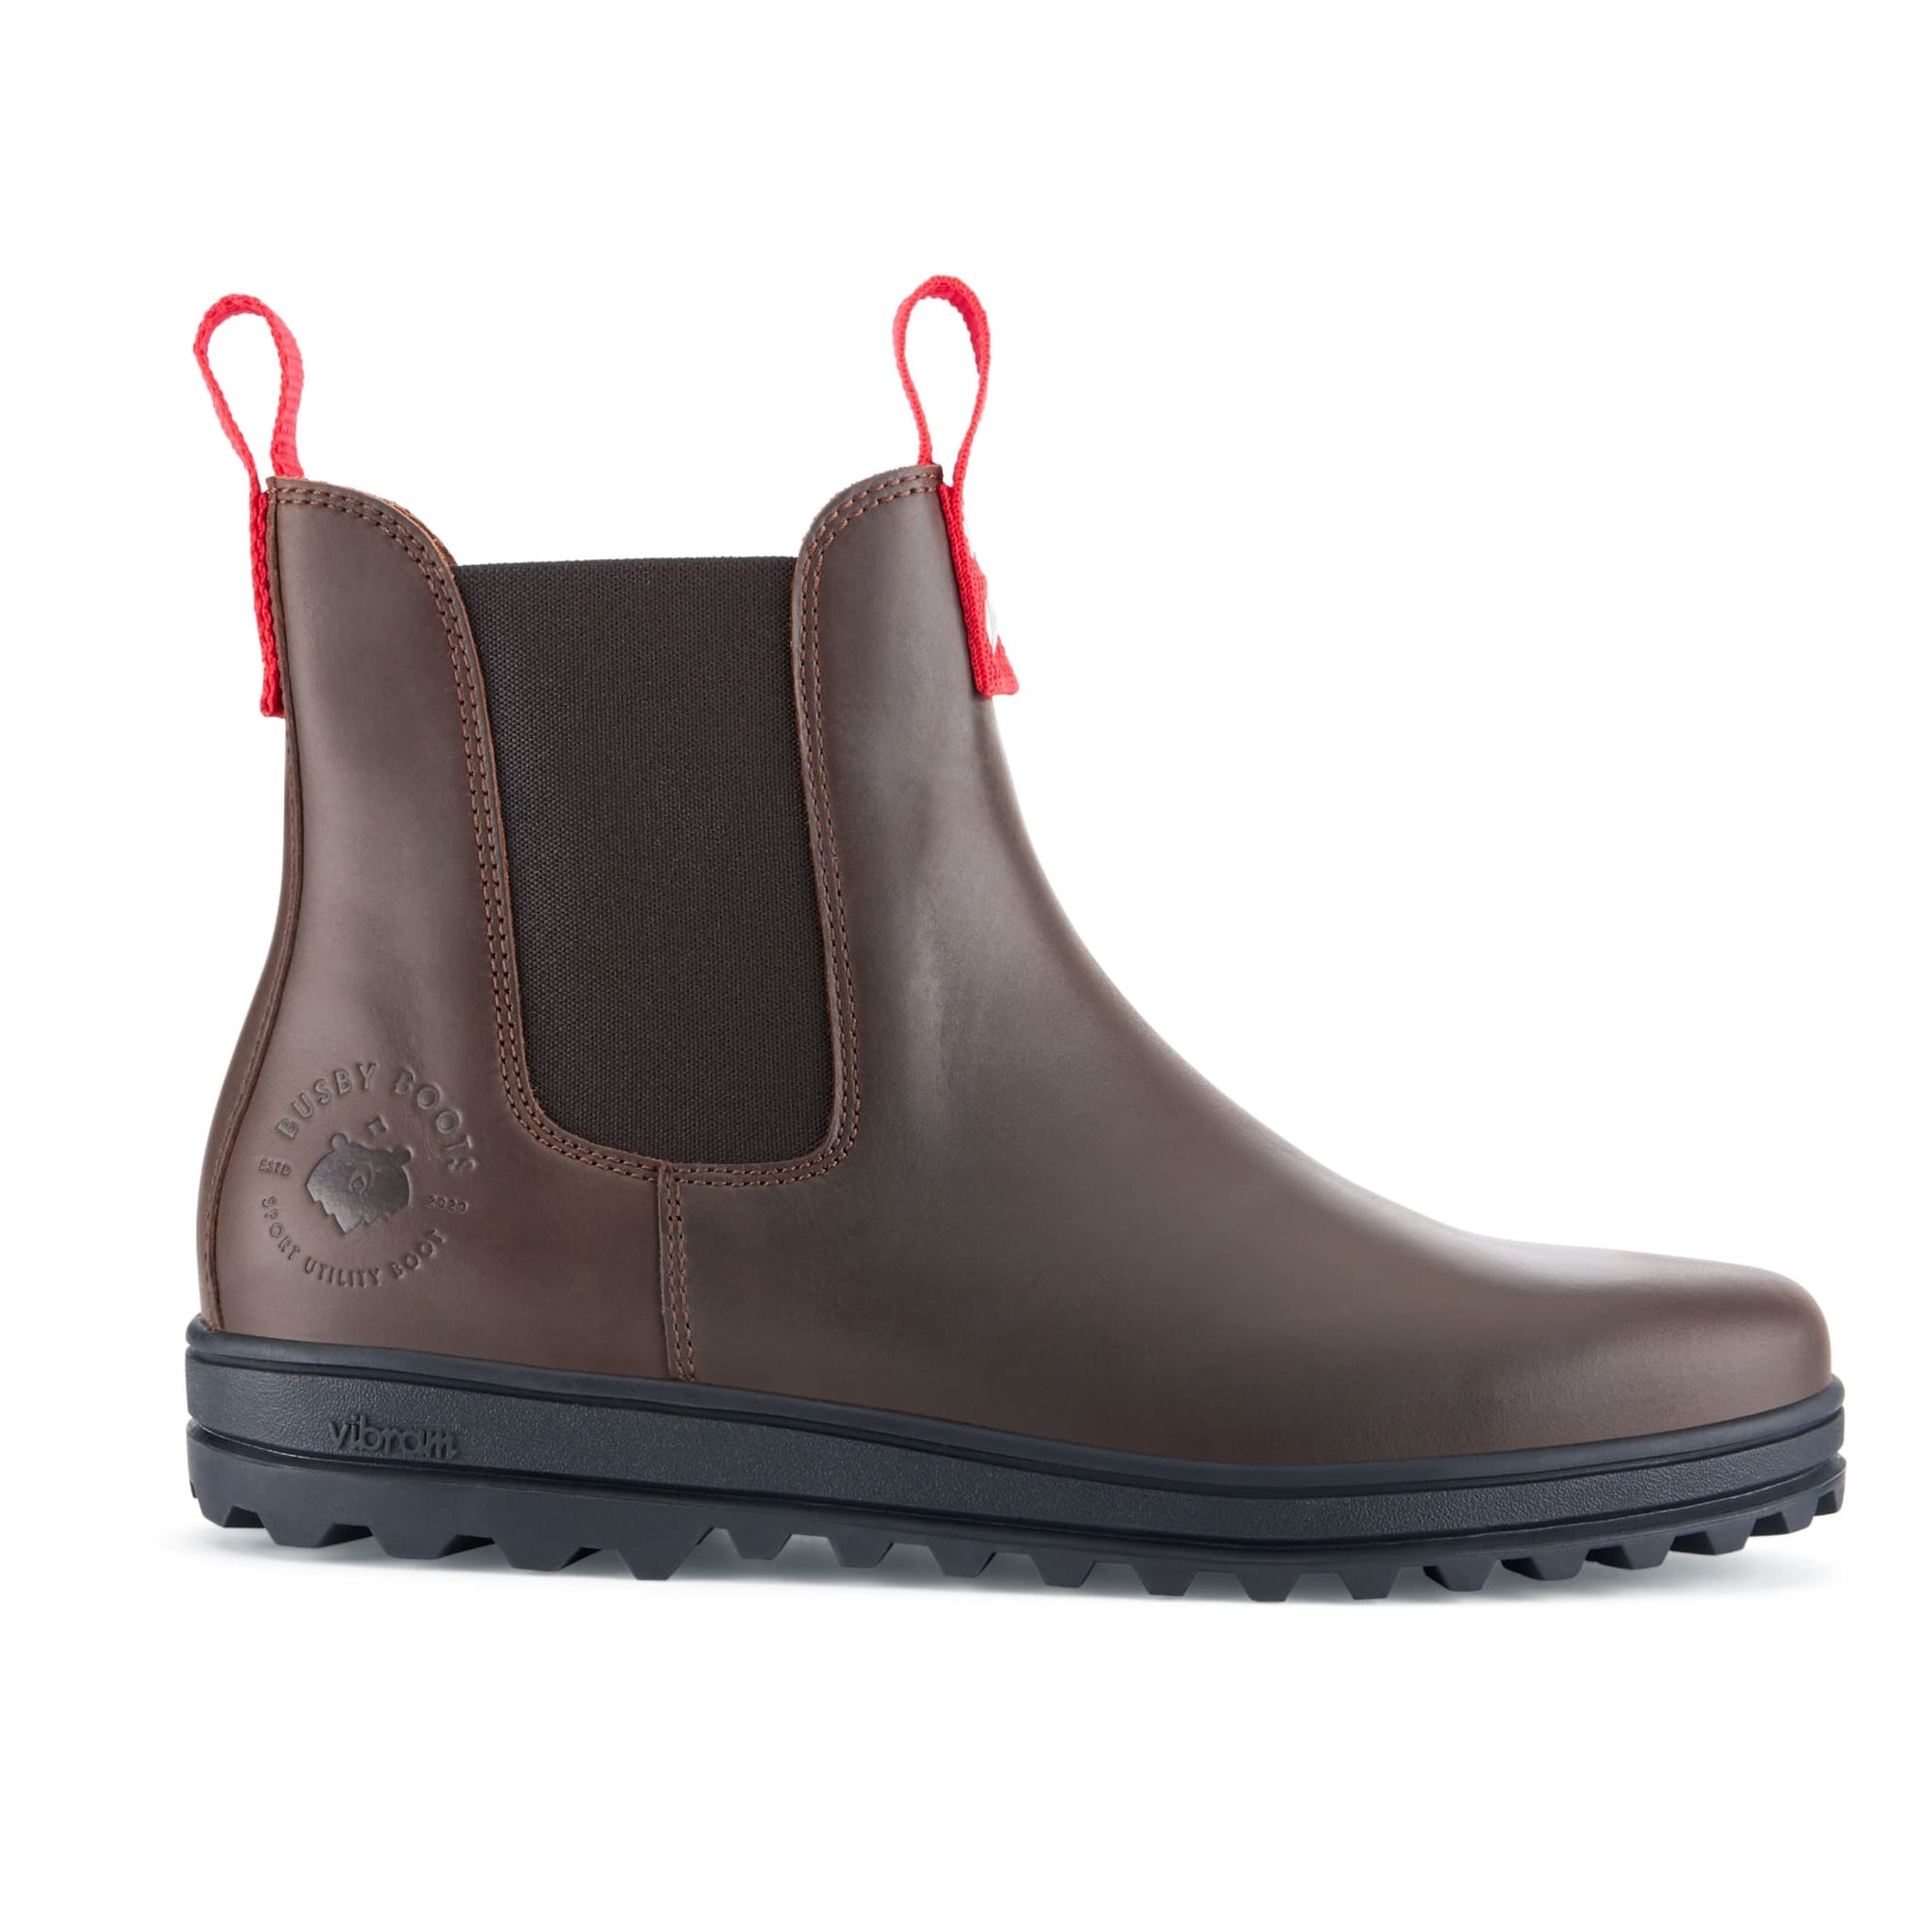 Busby Men's Winter Chelsea Boot, Brown Leather